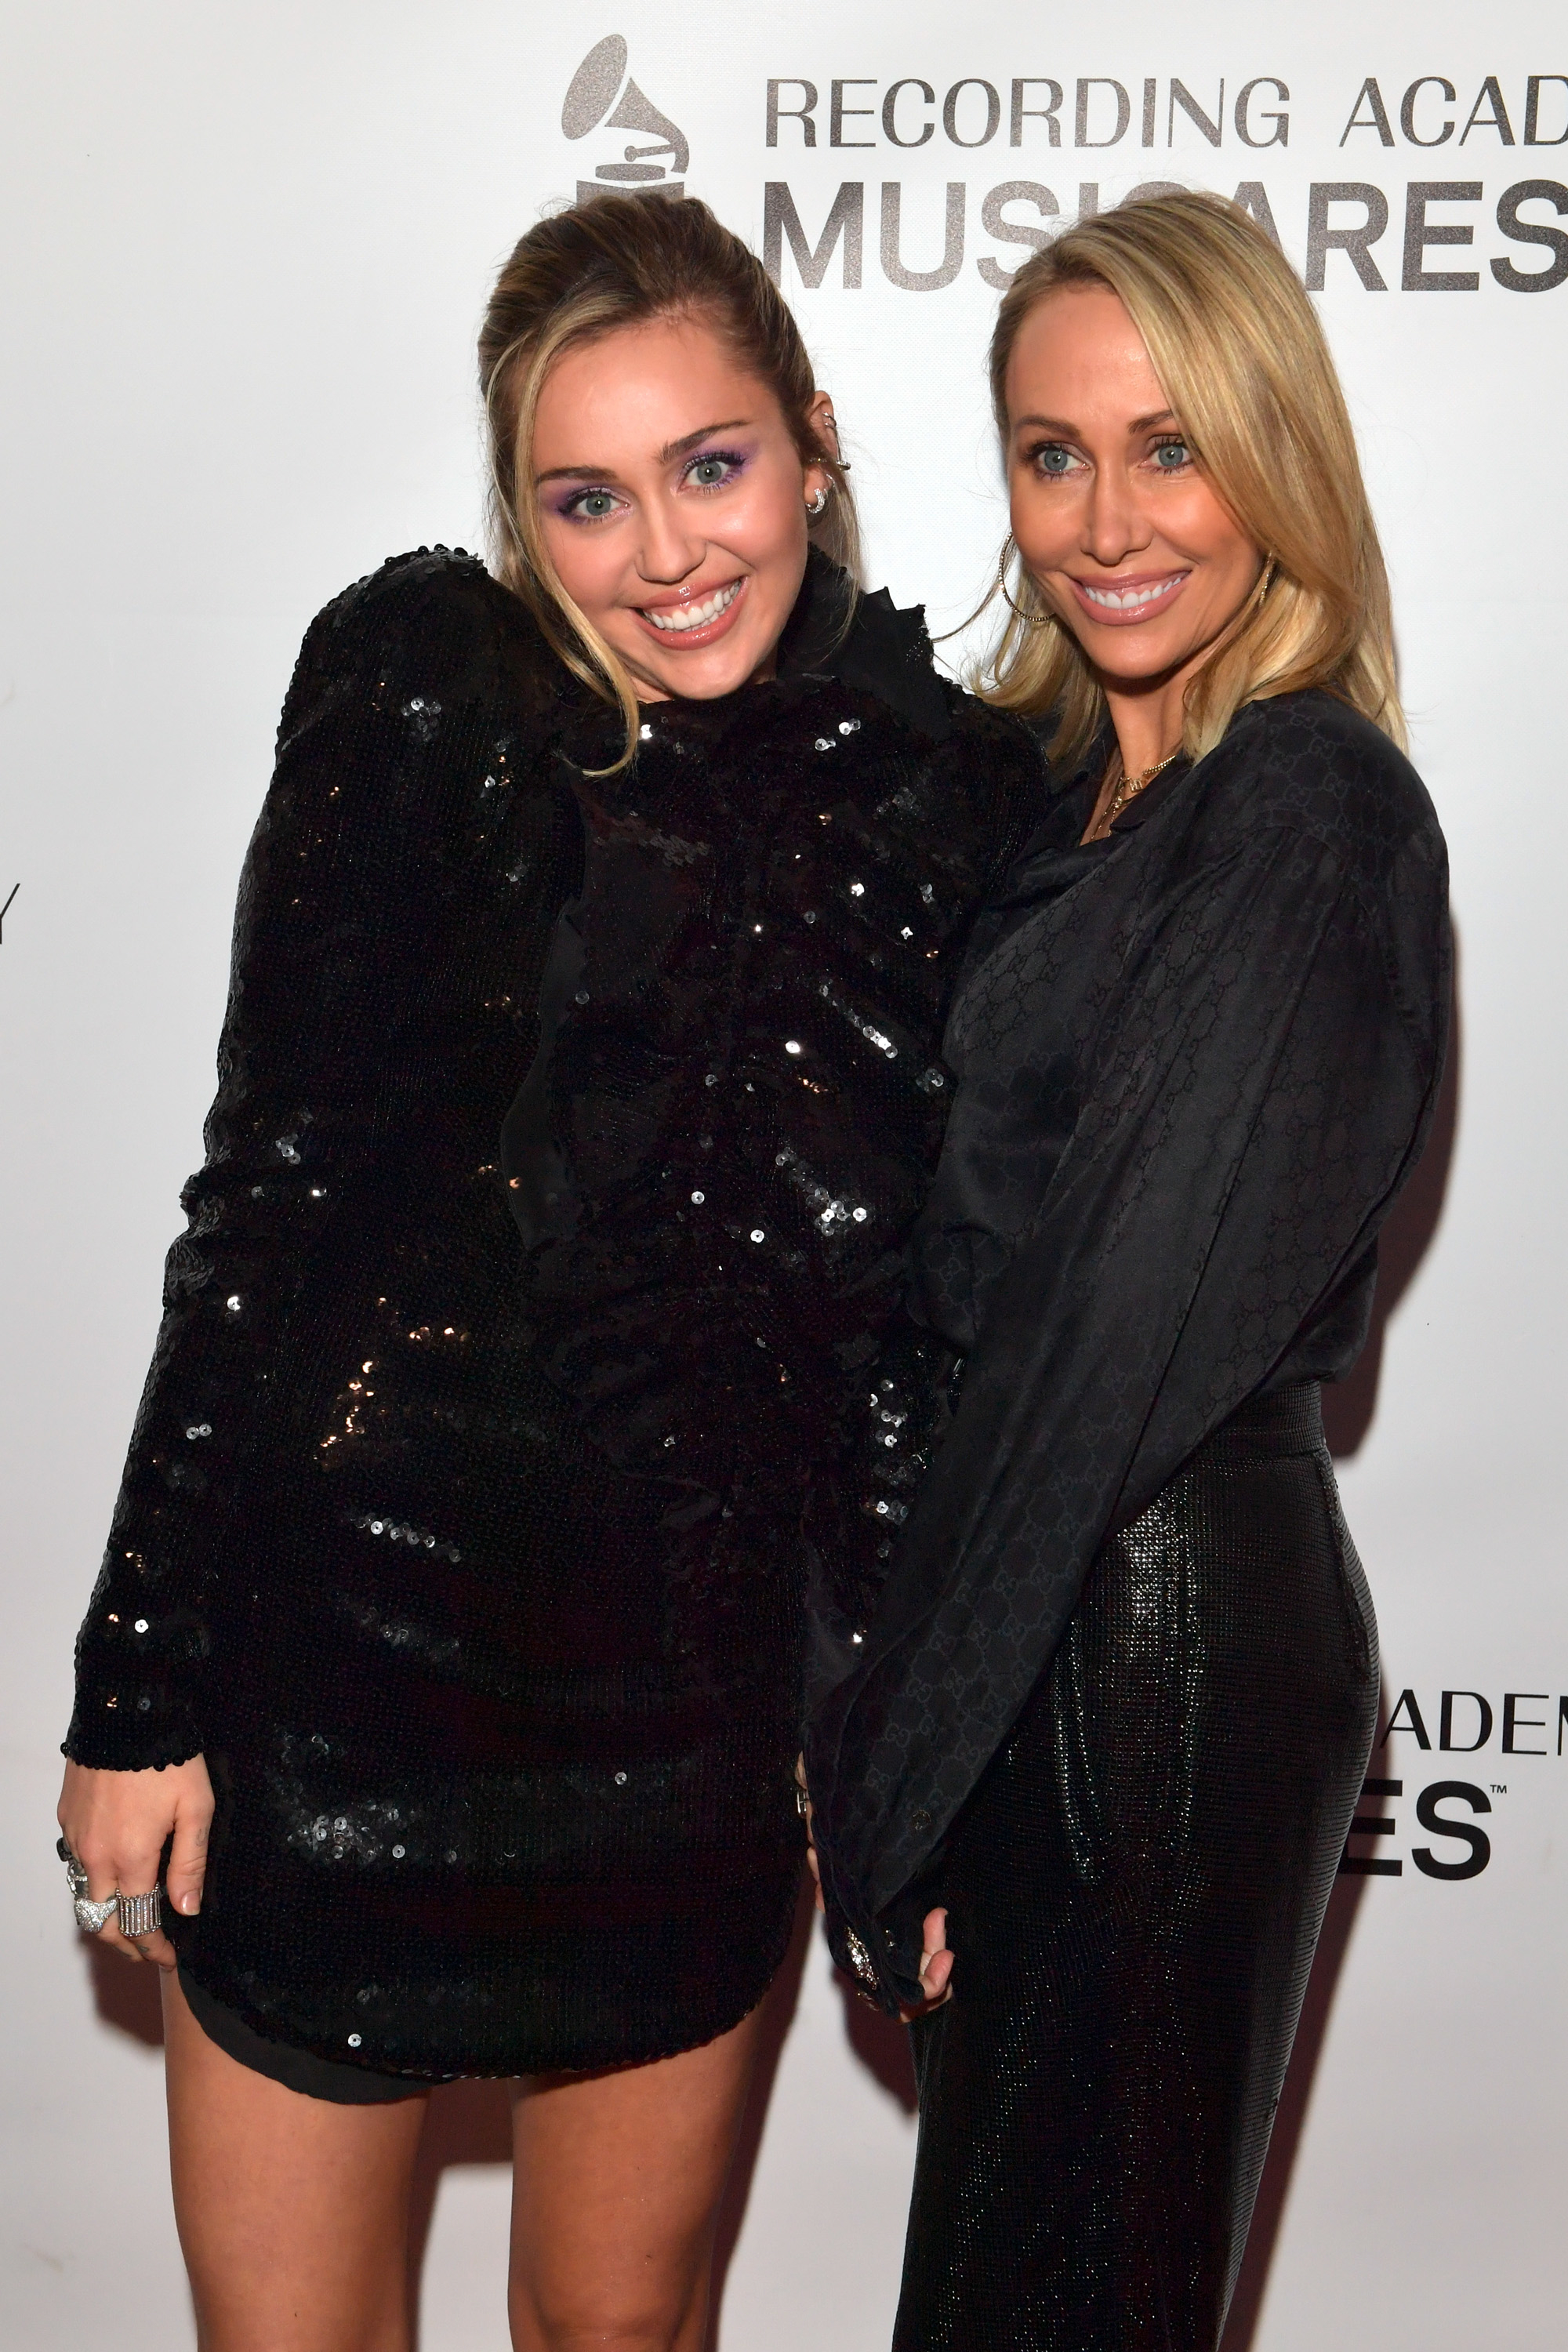 Close-up of Miley and Tish at a media event